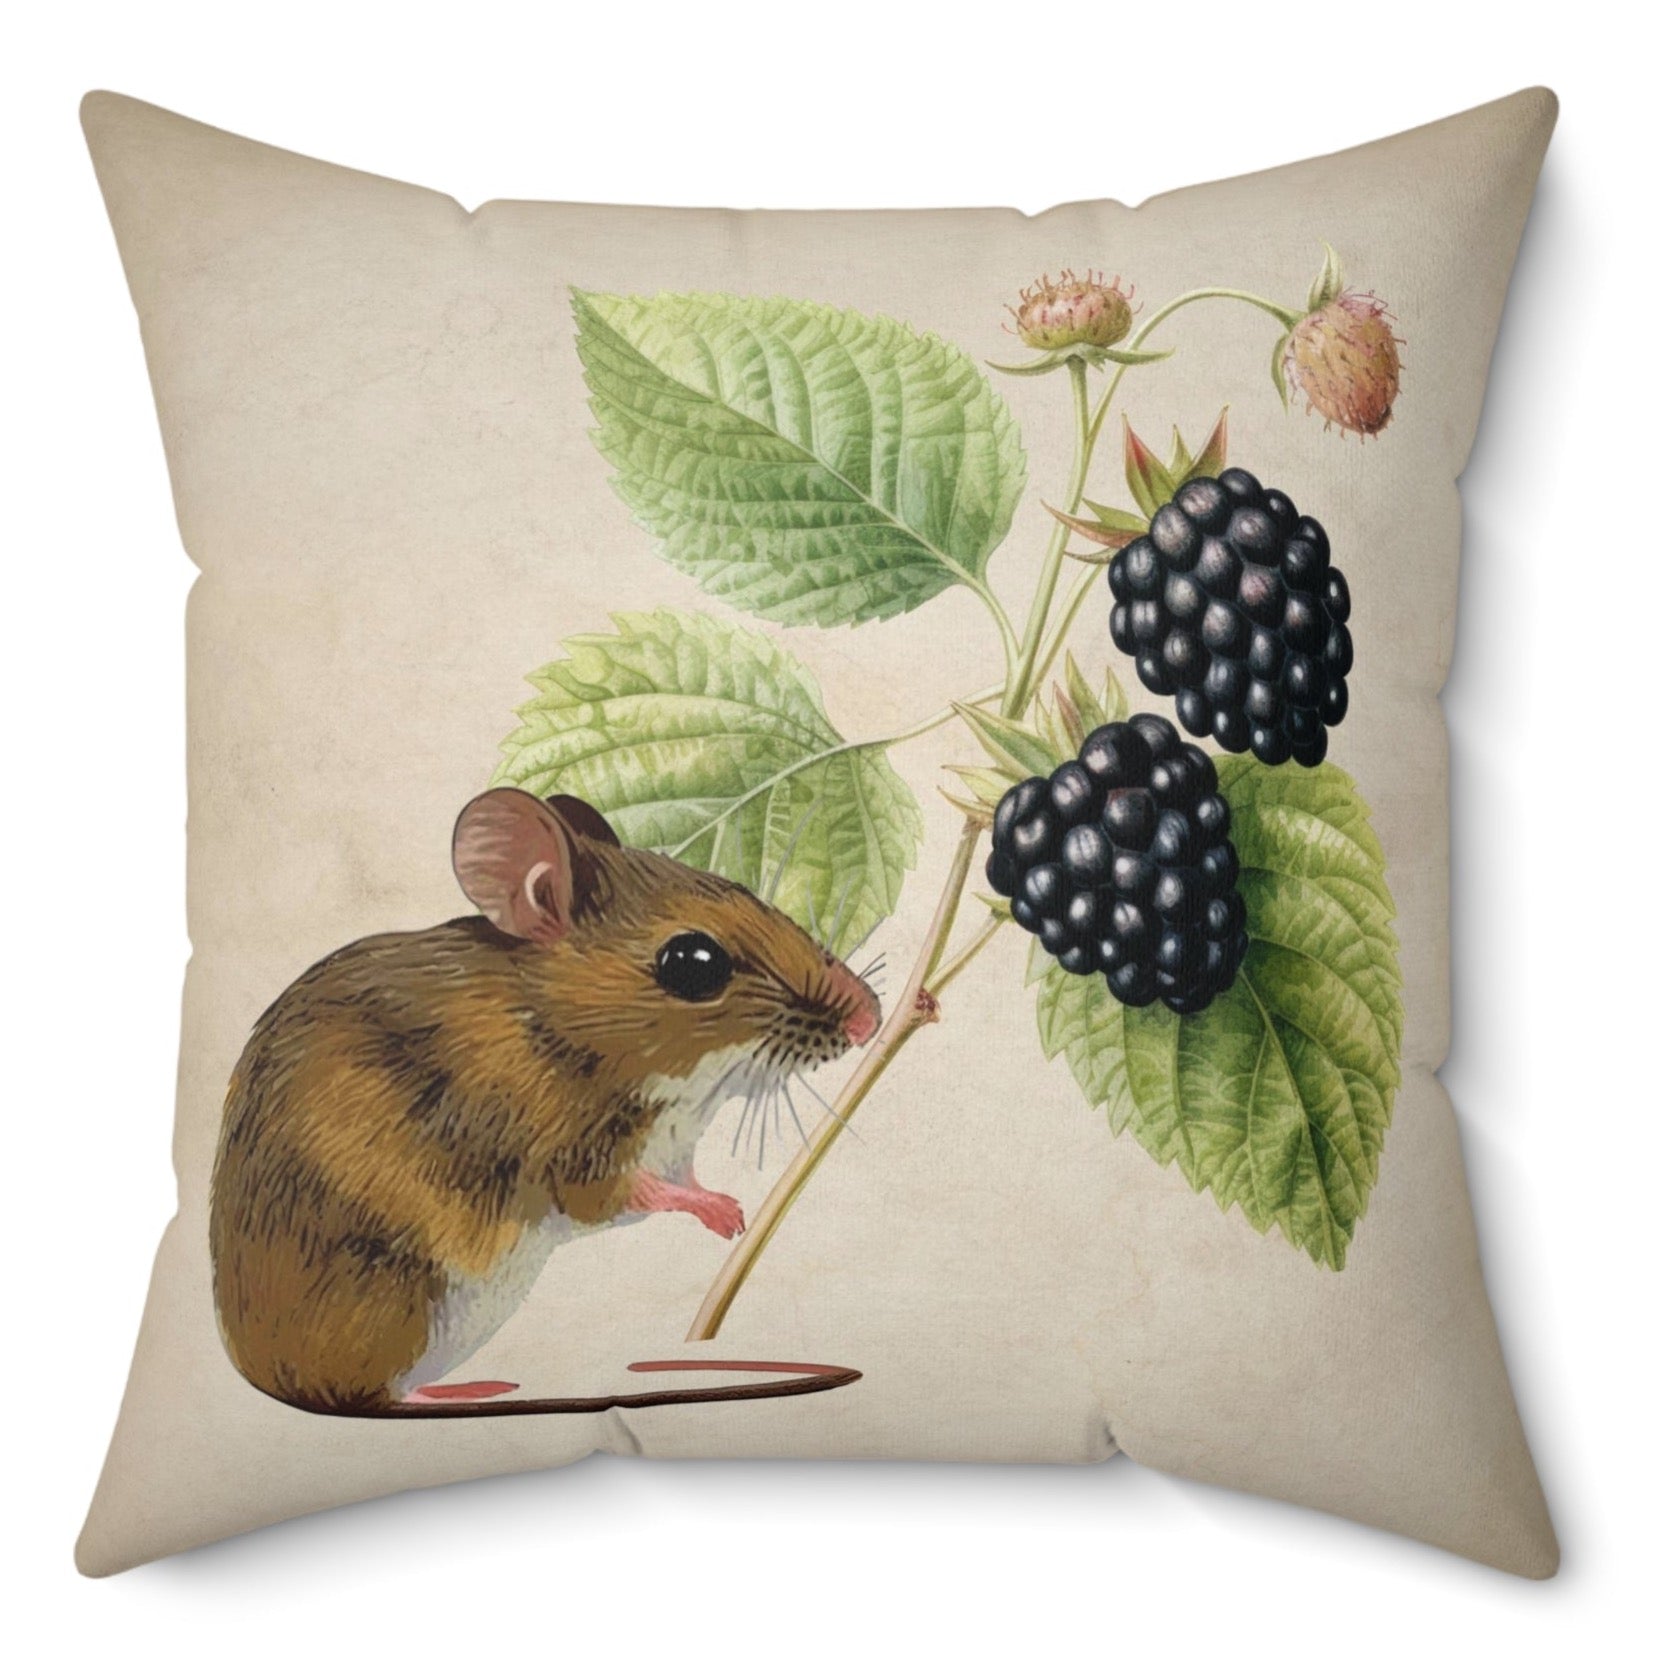 Mouse and Blackberry Vintage Botanical Cushion Throw Pillow Polyester Square Cover